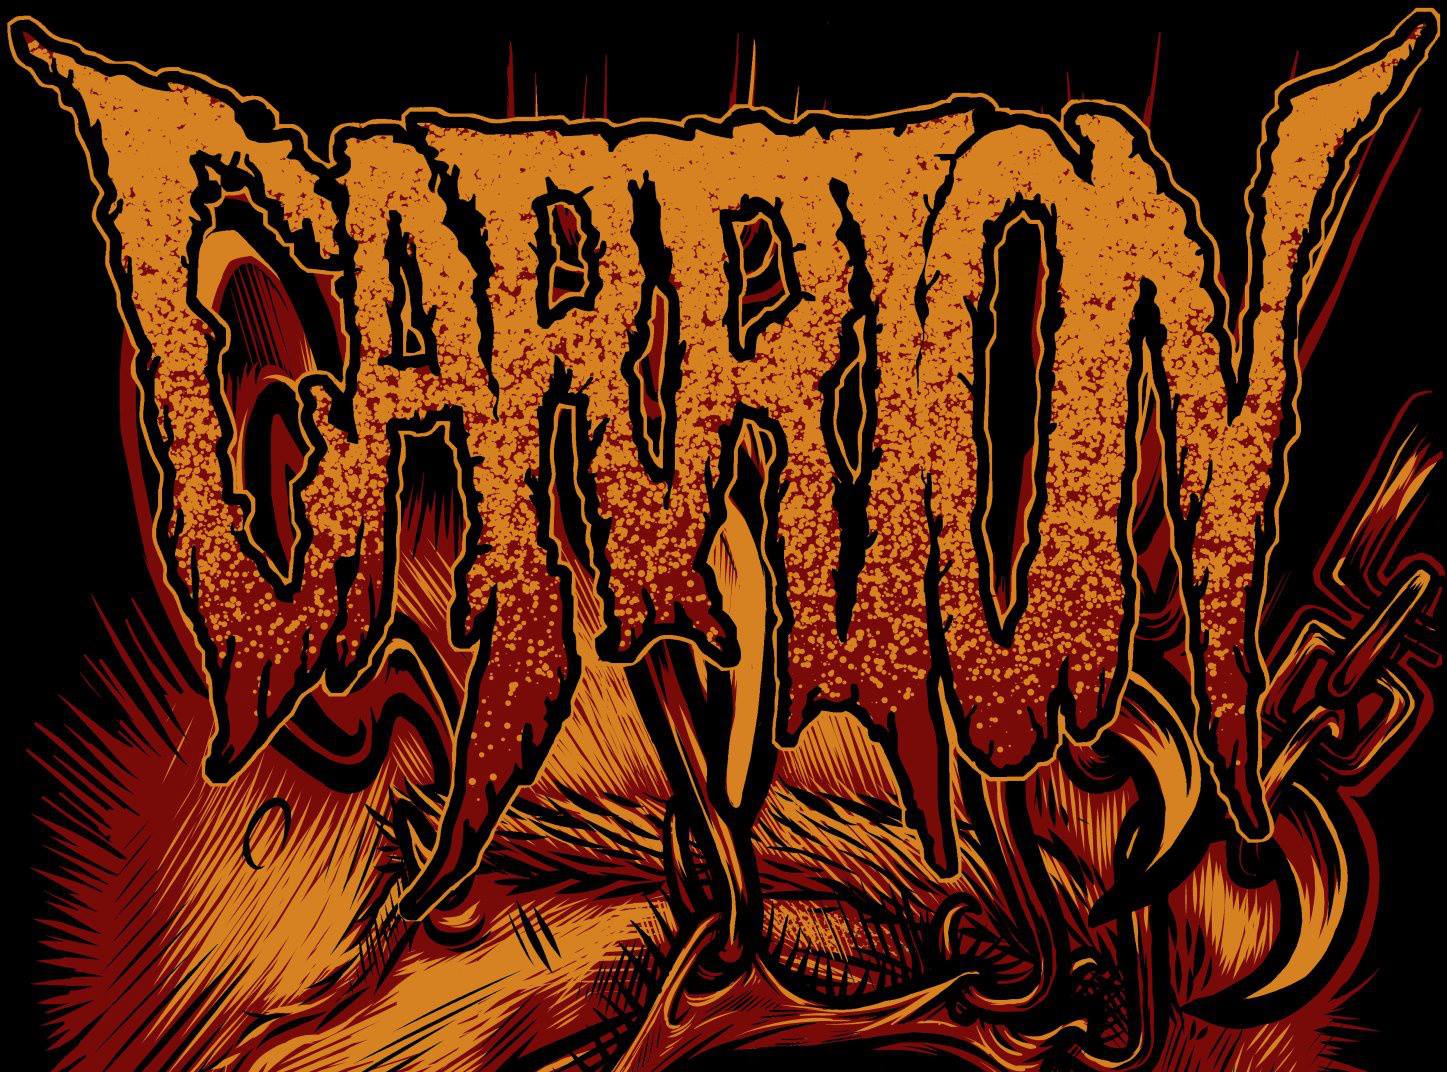 download carrion price